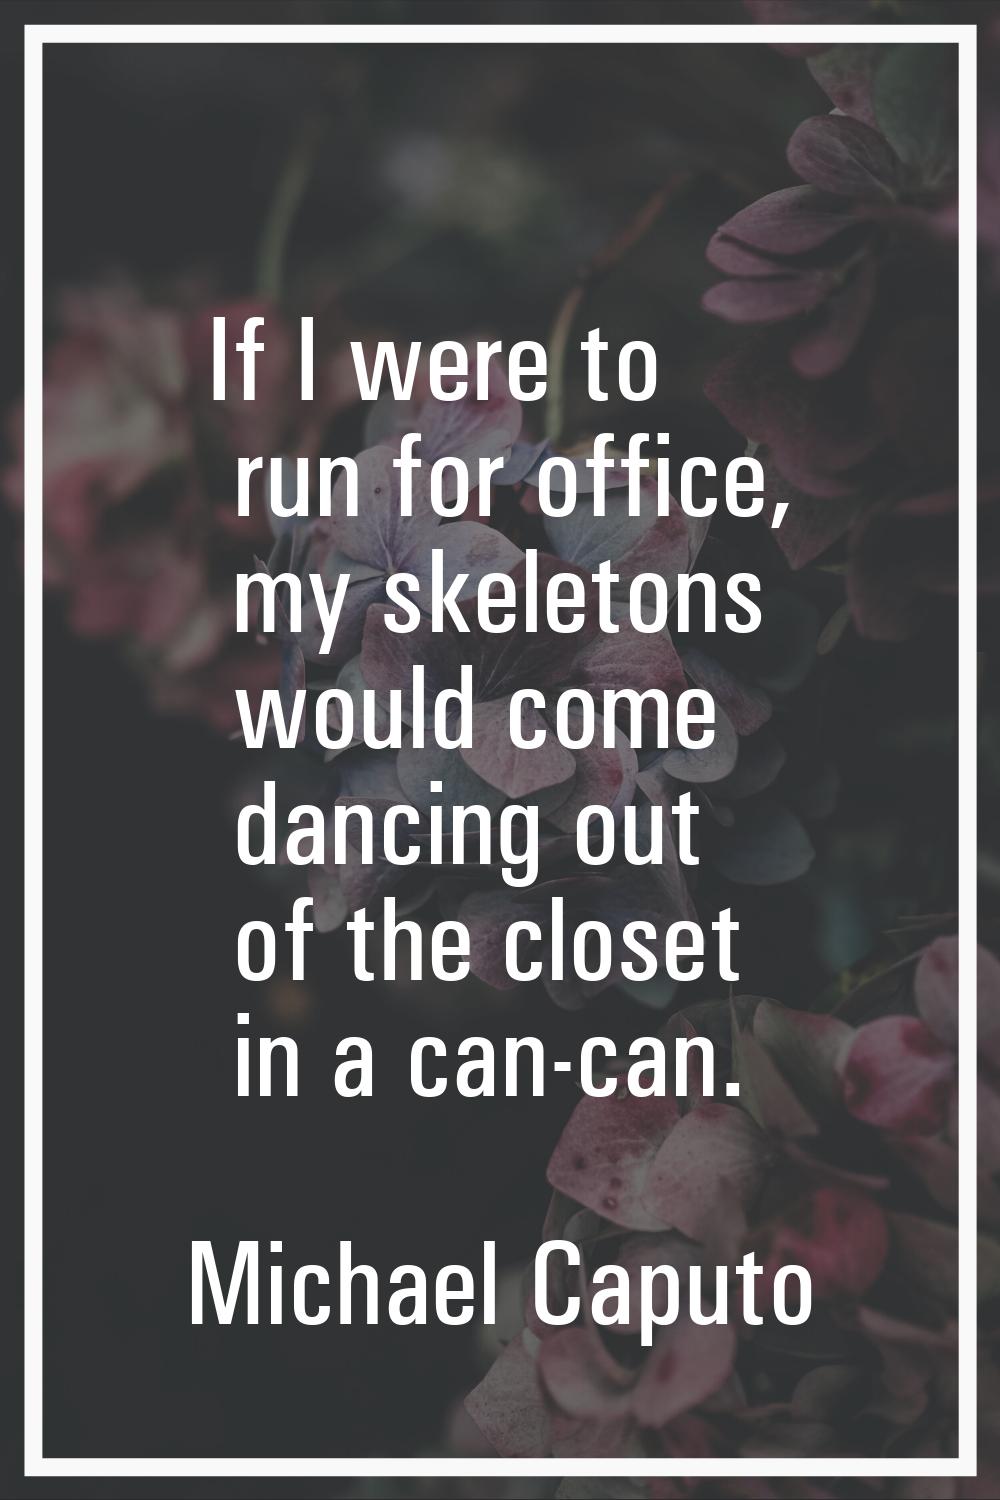 If I were to run for office, my skeletons would come dancing out of the closet in a can-can.